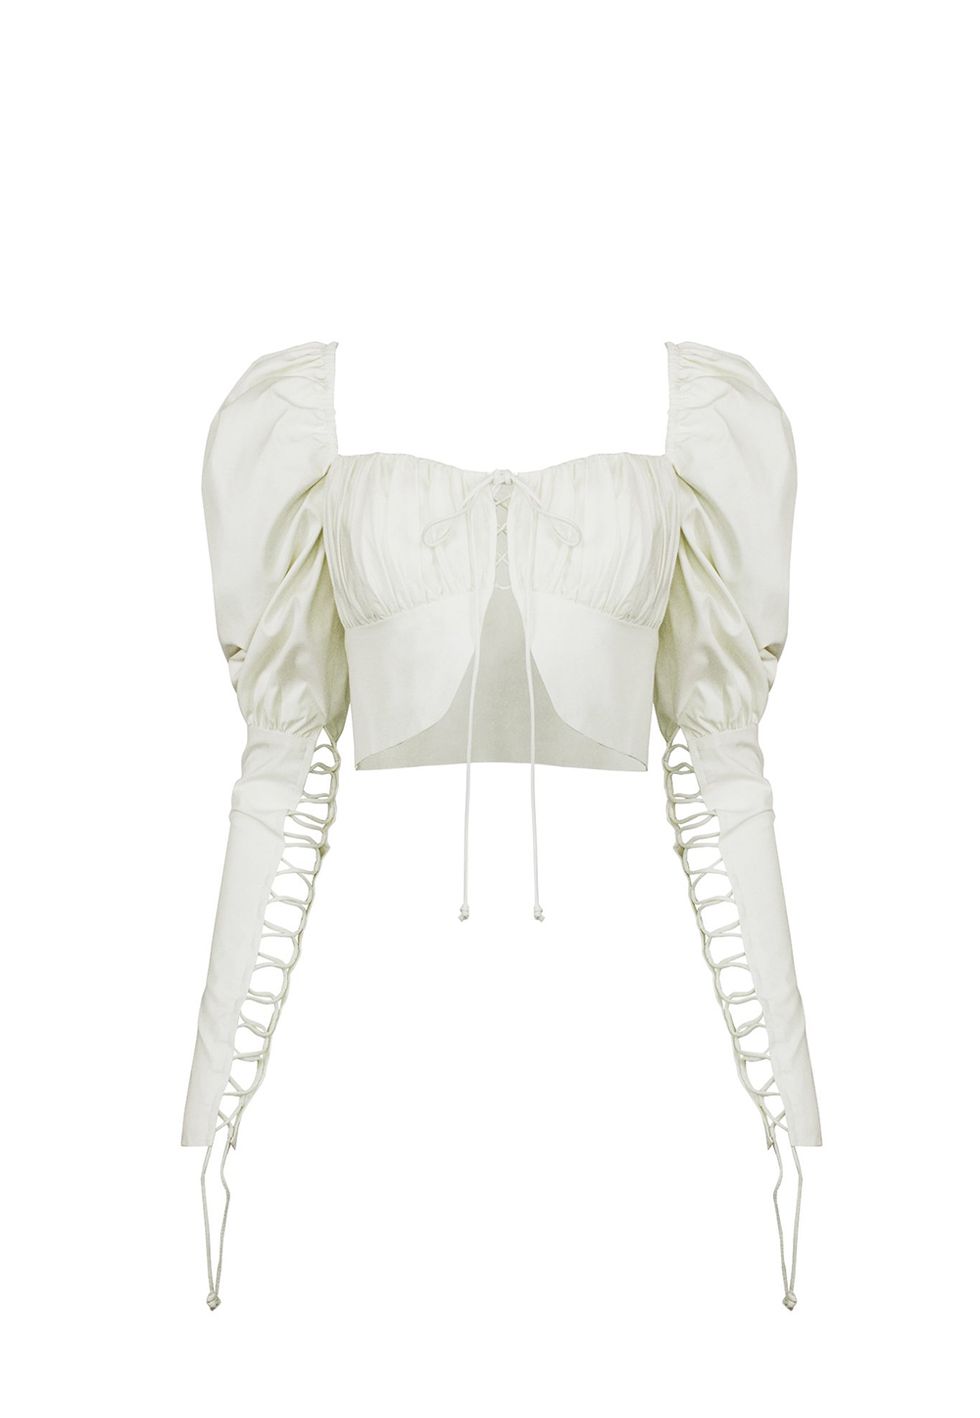 White, Clothing, Outerwear, Crop top, Dress, Sleeve, Jacket, Costume, Top, 